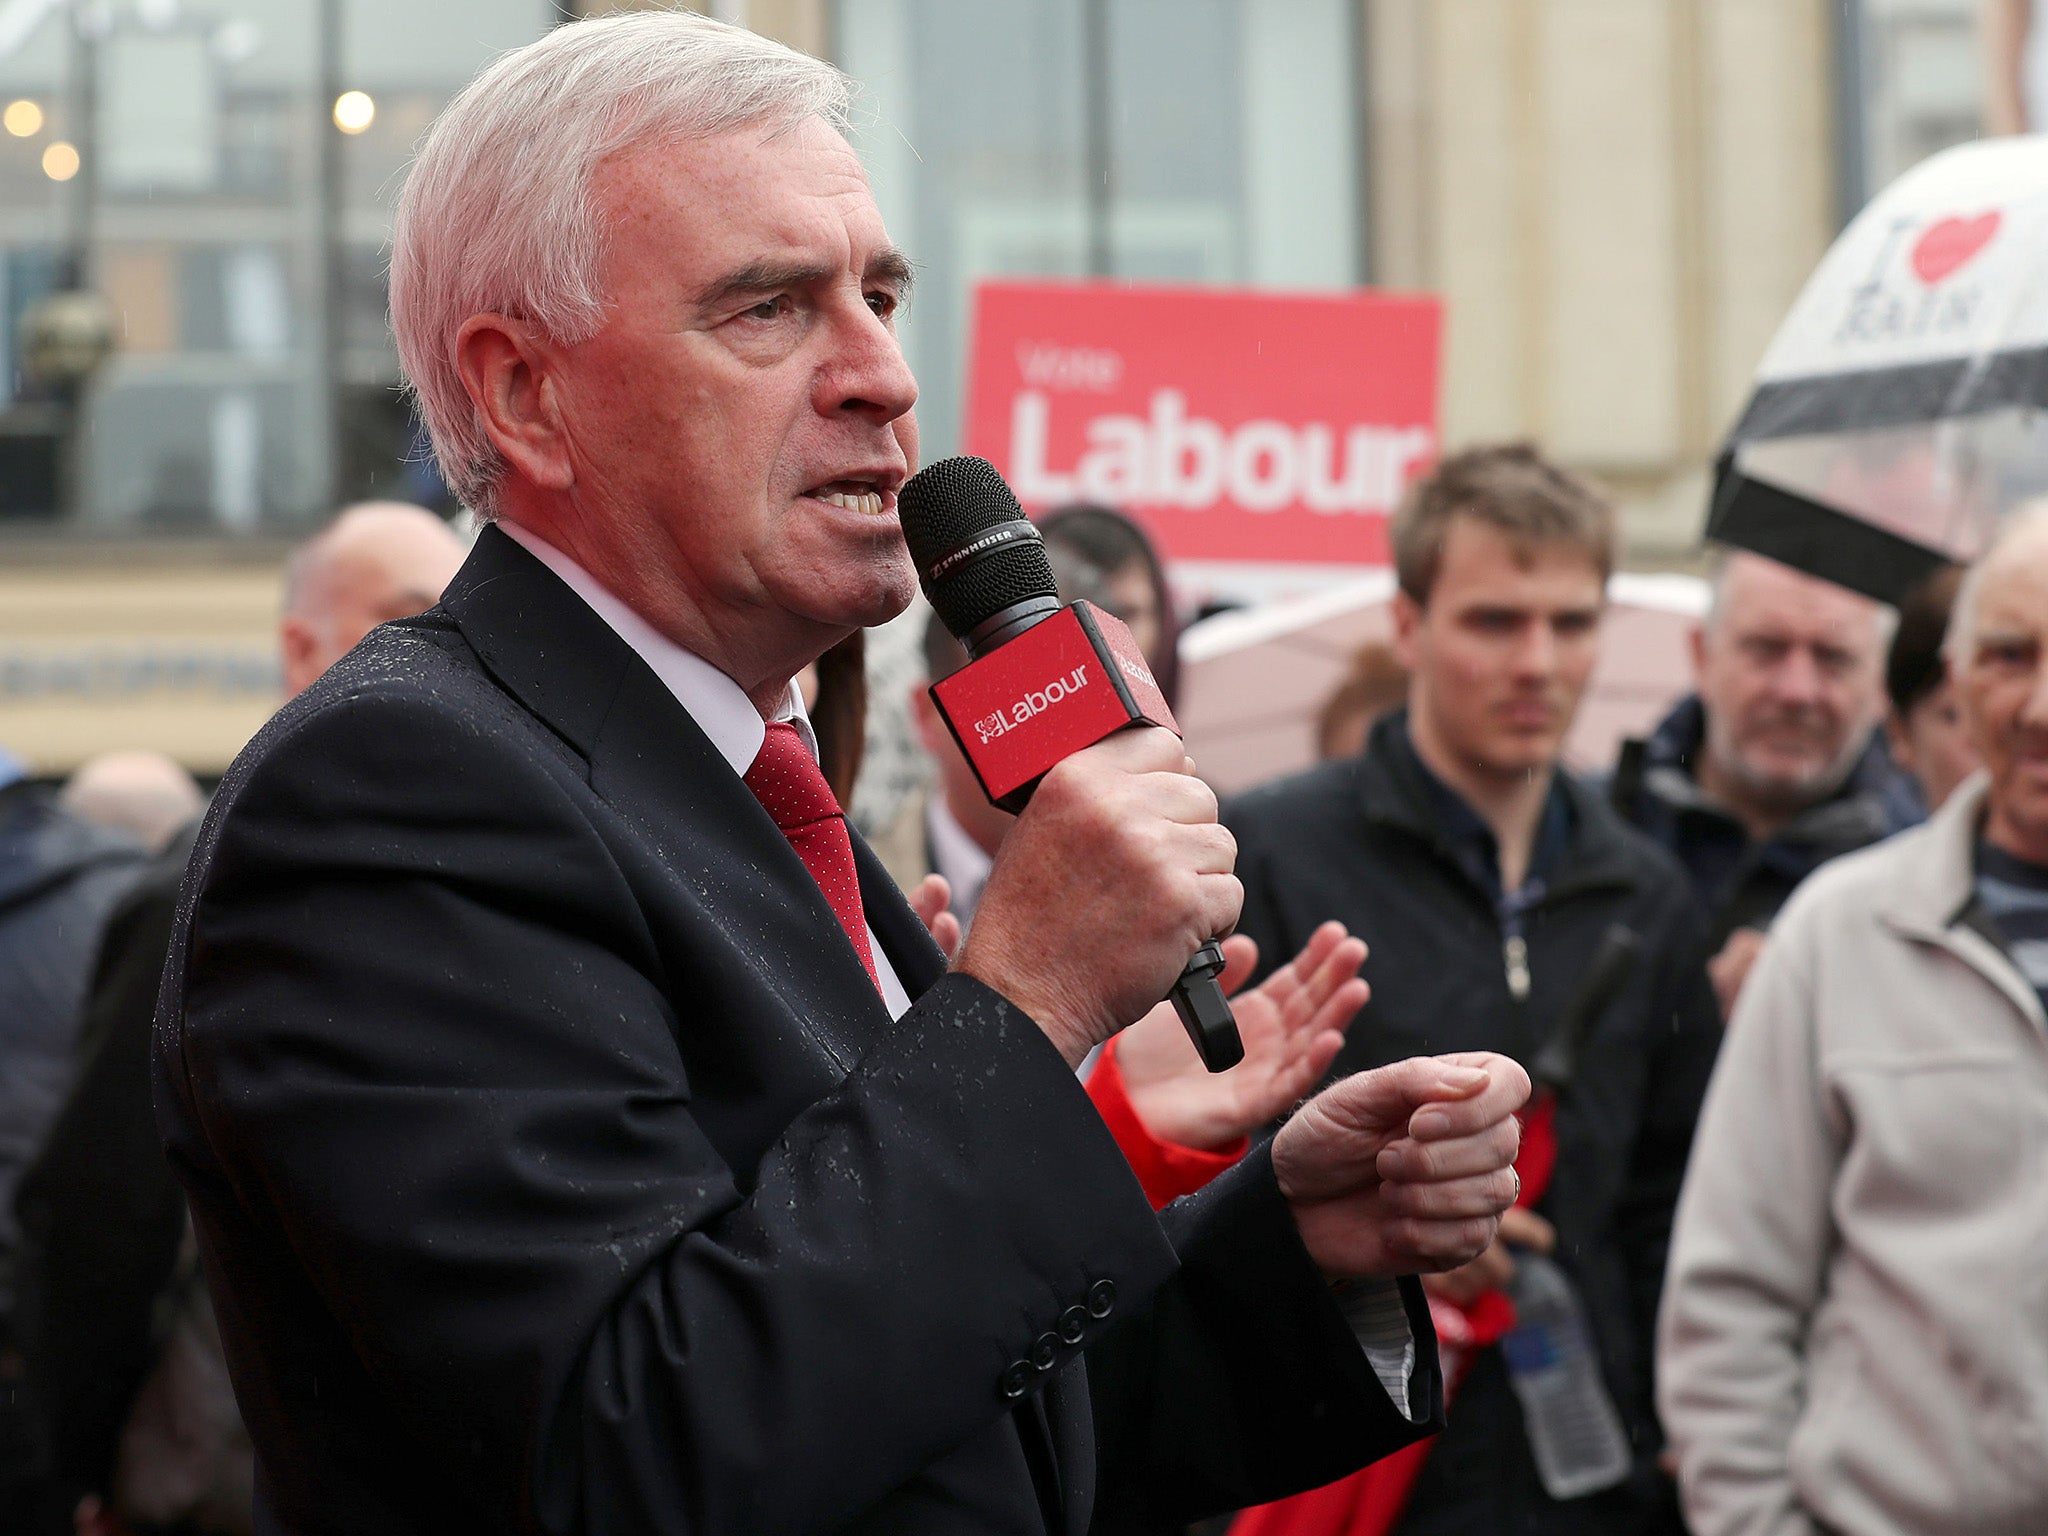 Labour budget calculations will include economic impact of climate change, says John McDonnell